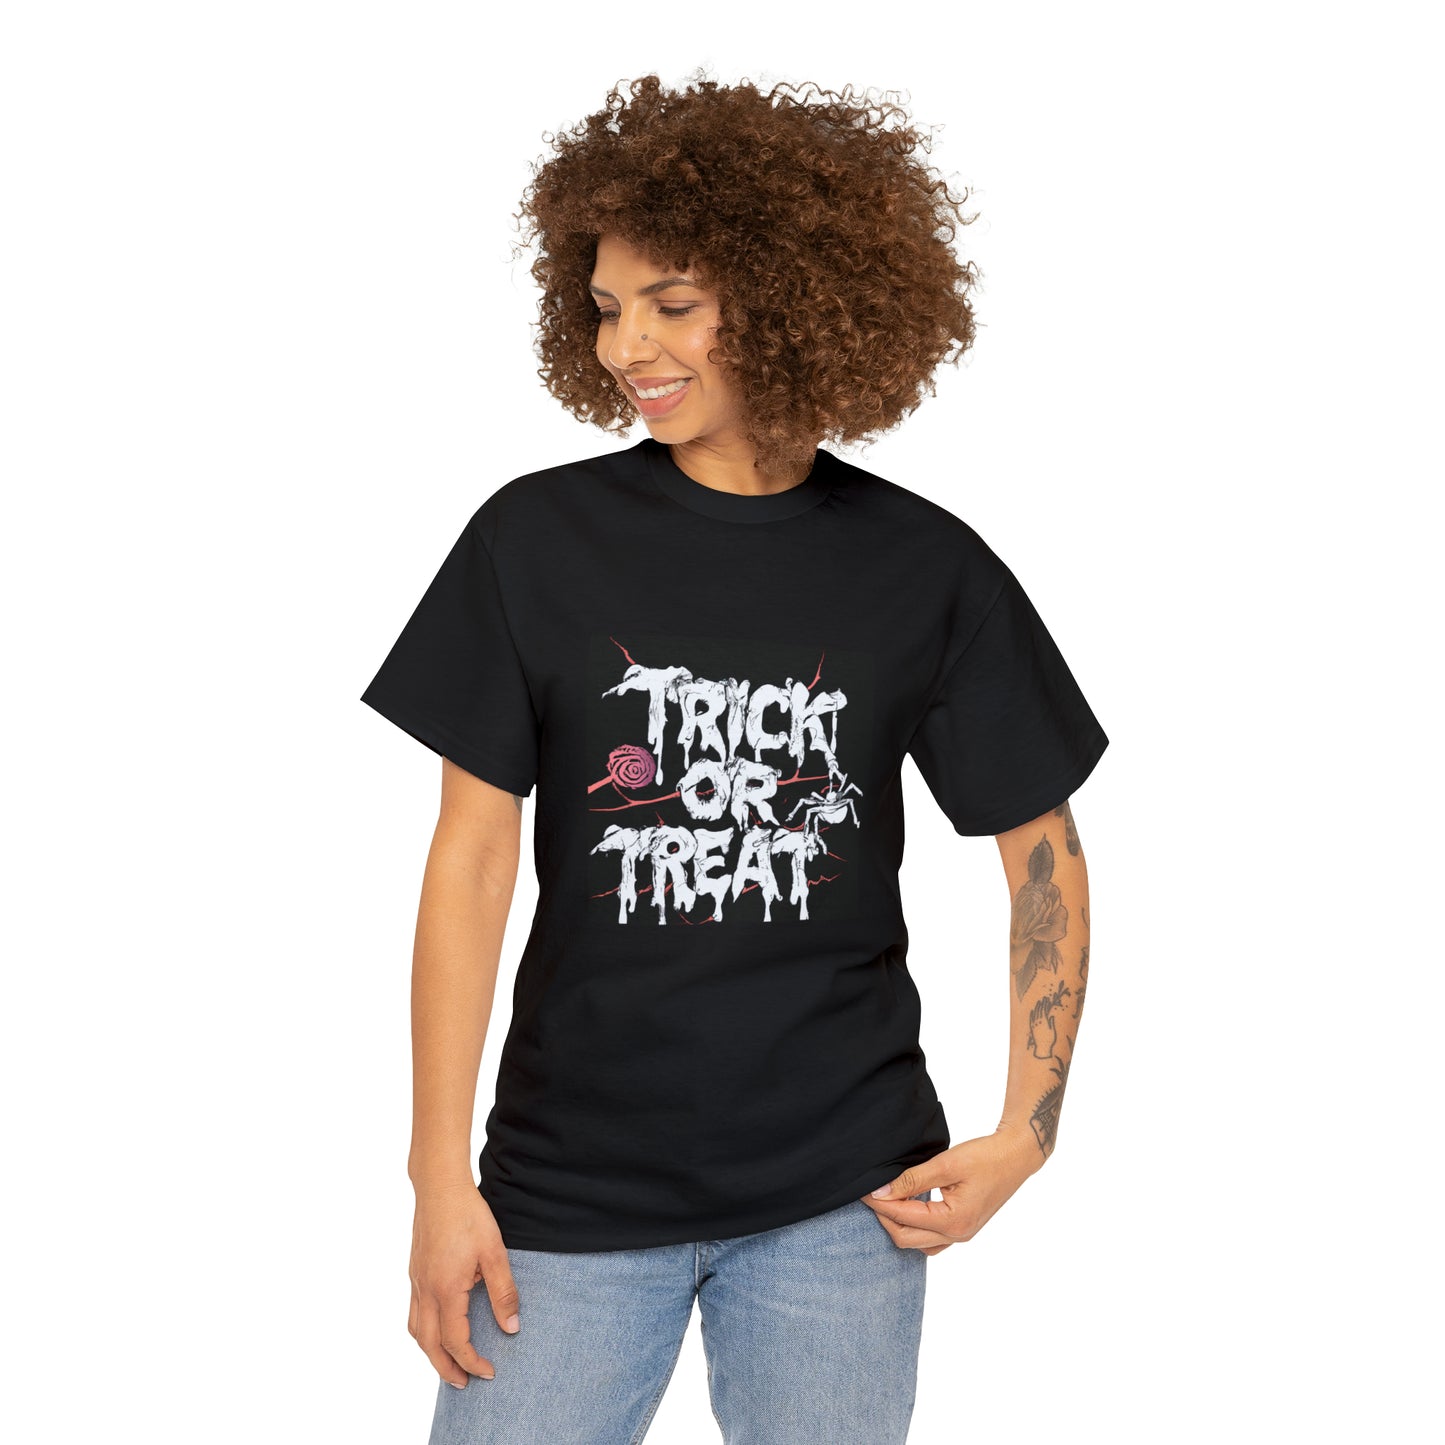 Trick or Treat Black Unisex Heavy Cotton Tee for Halloween and Fall Wardrobe